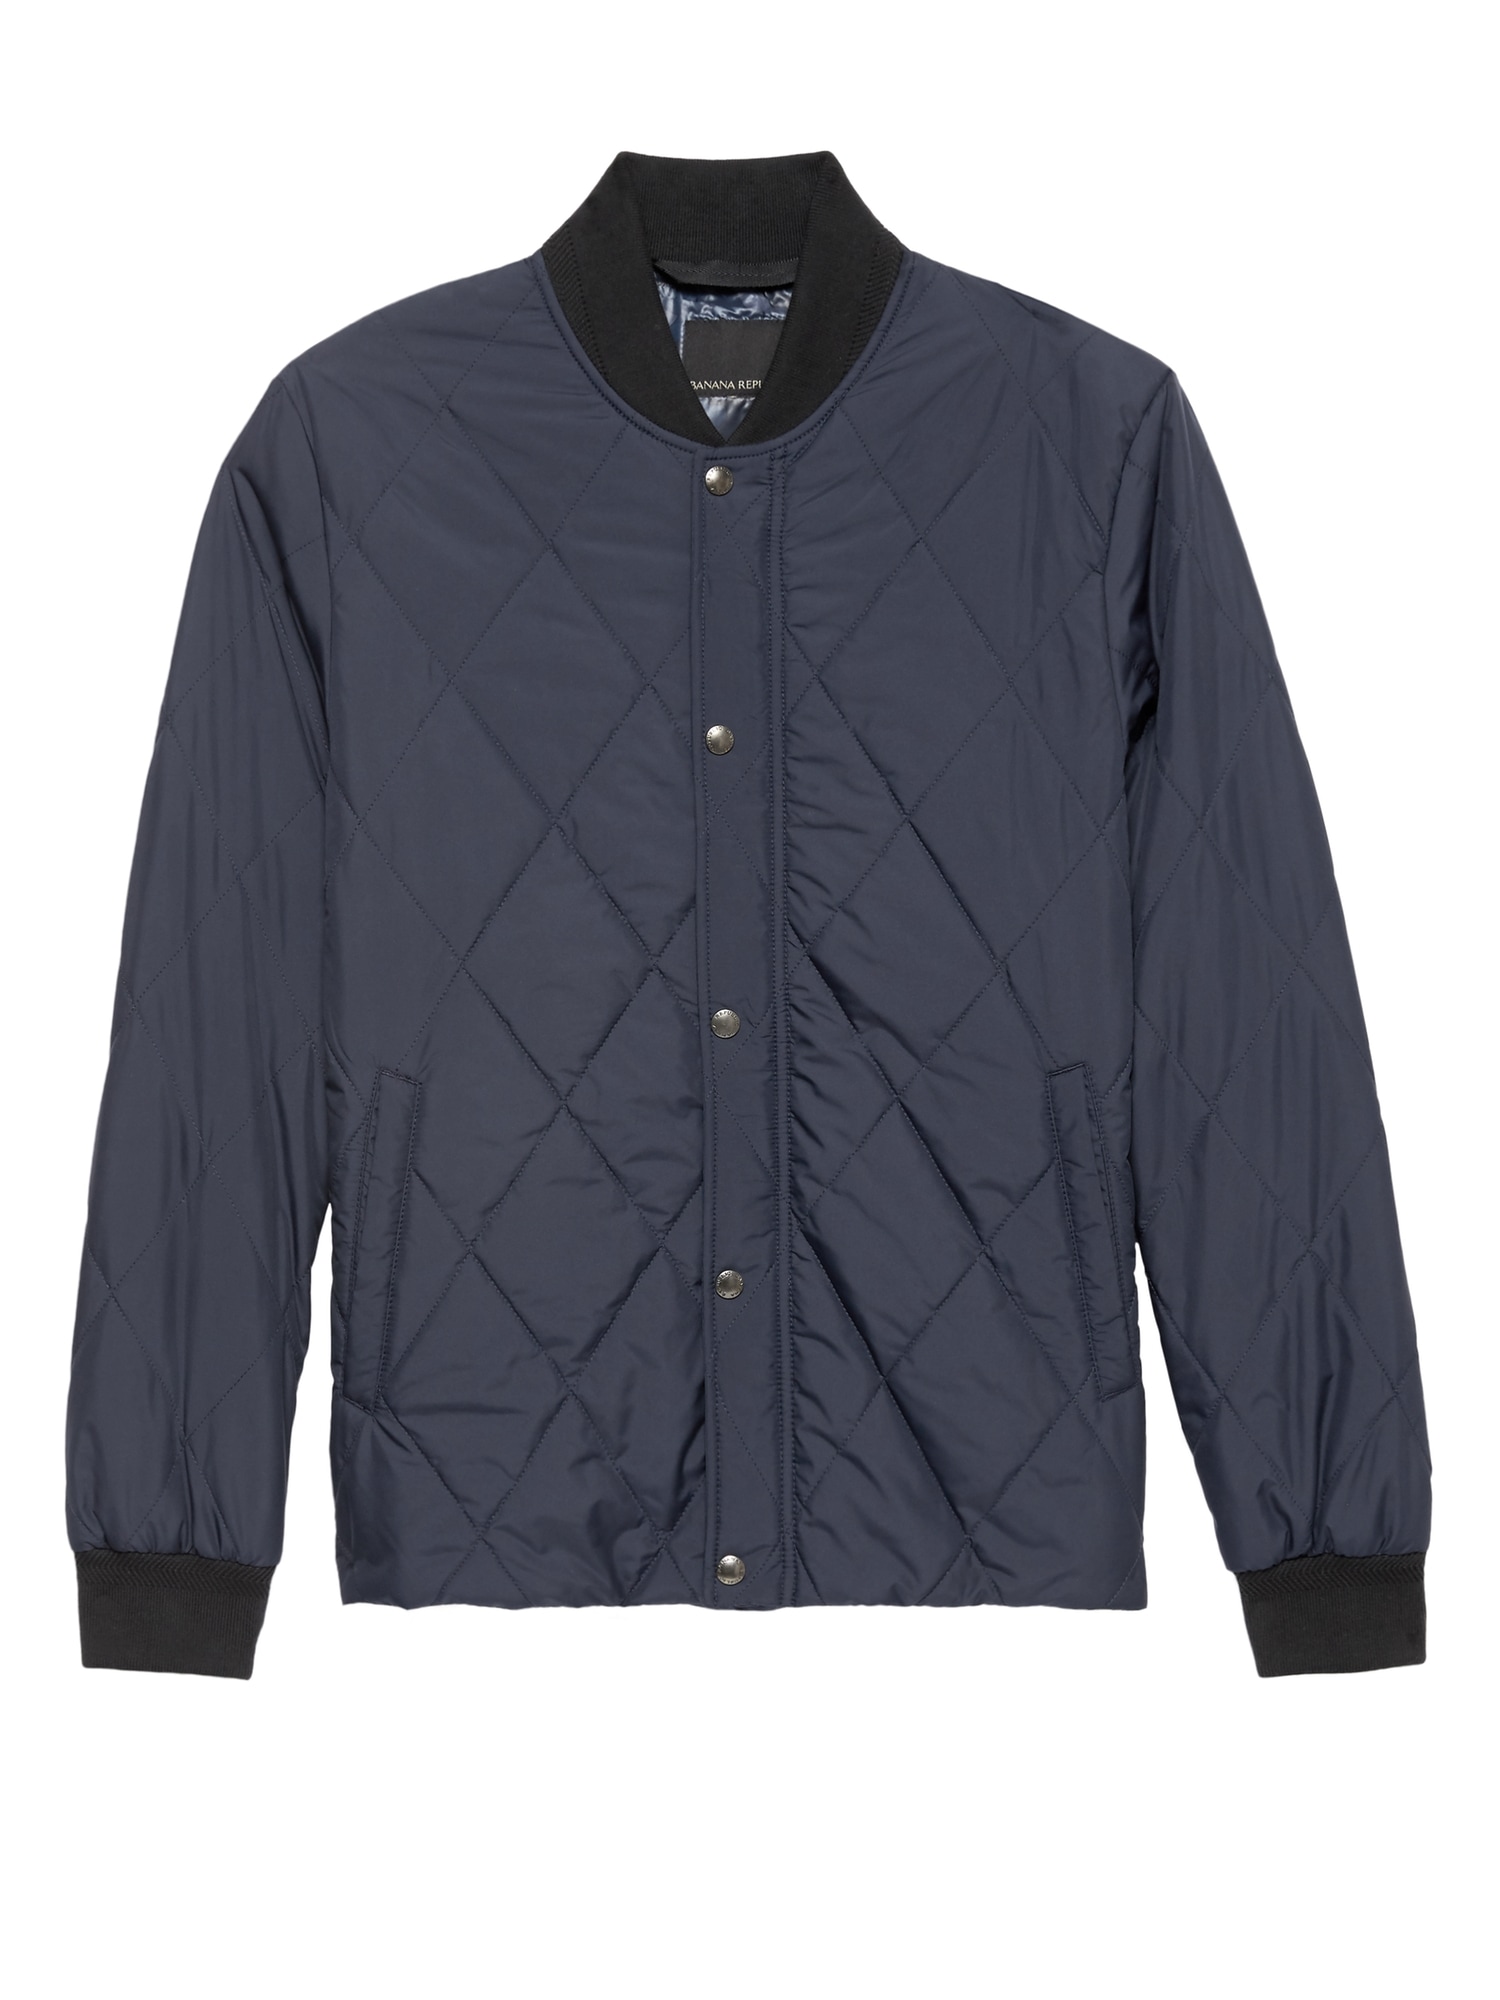 Water-Resistant Quilted Bomber Jacket